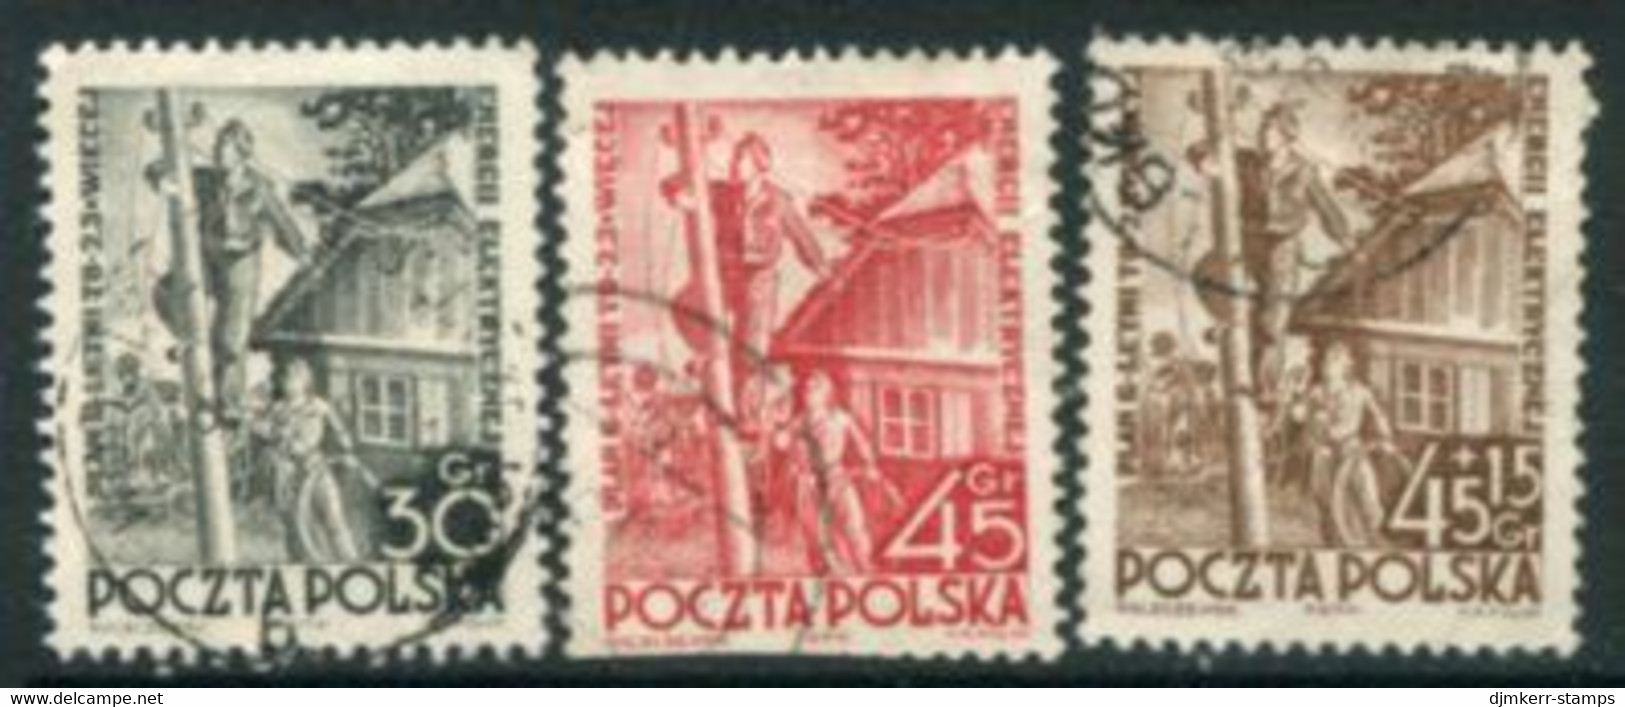 POLAND 1951 Electrical Industries Used.  Michel 719-20, 747 - Usati